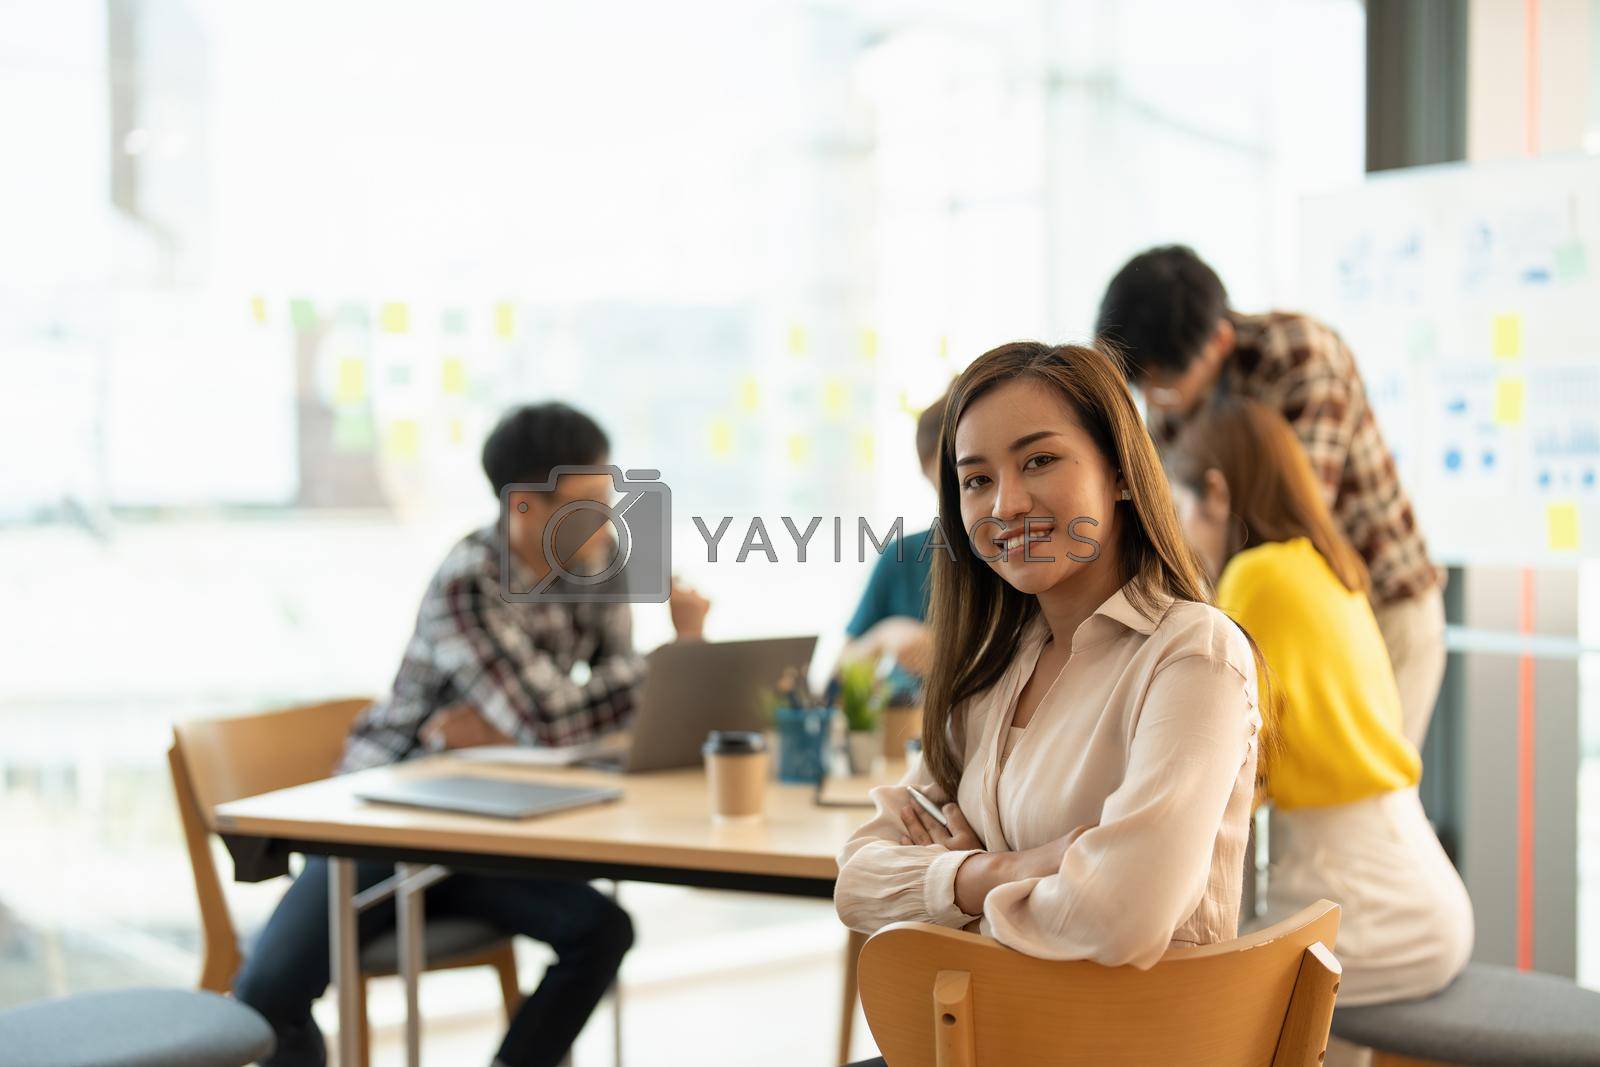 Attractive young Asian business woman smiling and looking over shoulders at business meeting with co-workers.